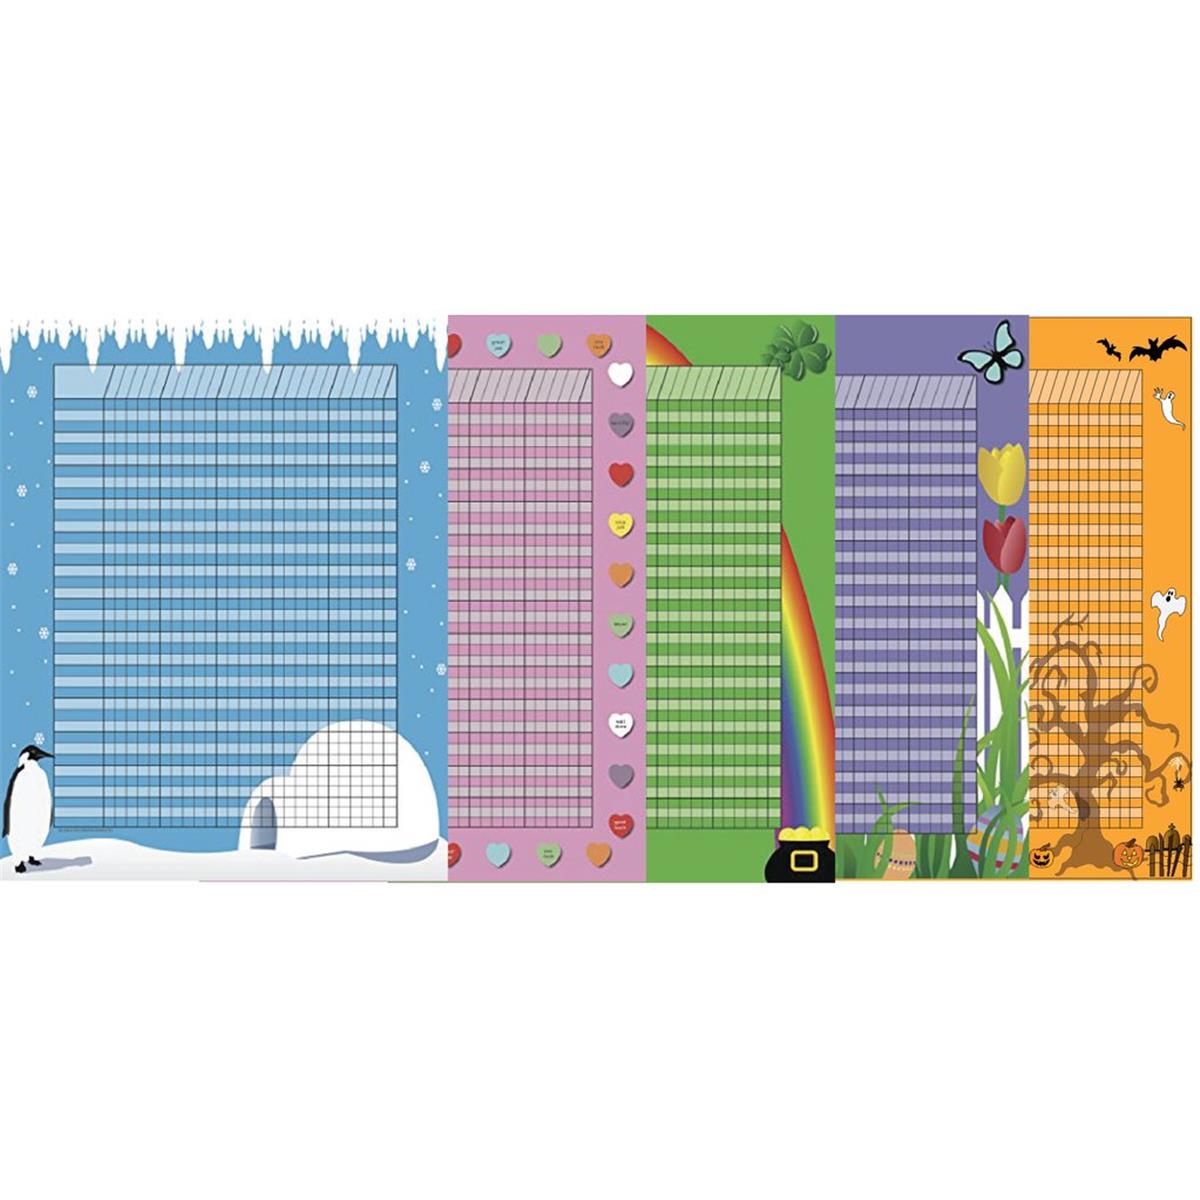 Se-3368 22 X 28 In. Vertical Chart Theme Set - 5 Count